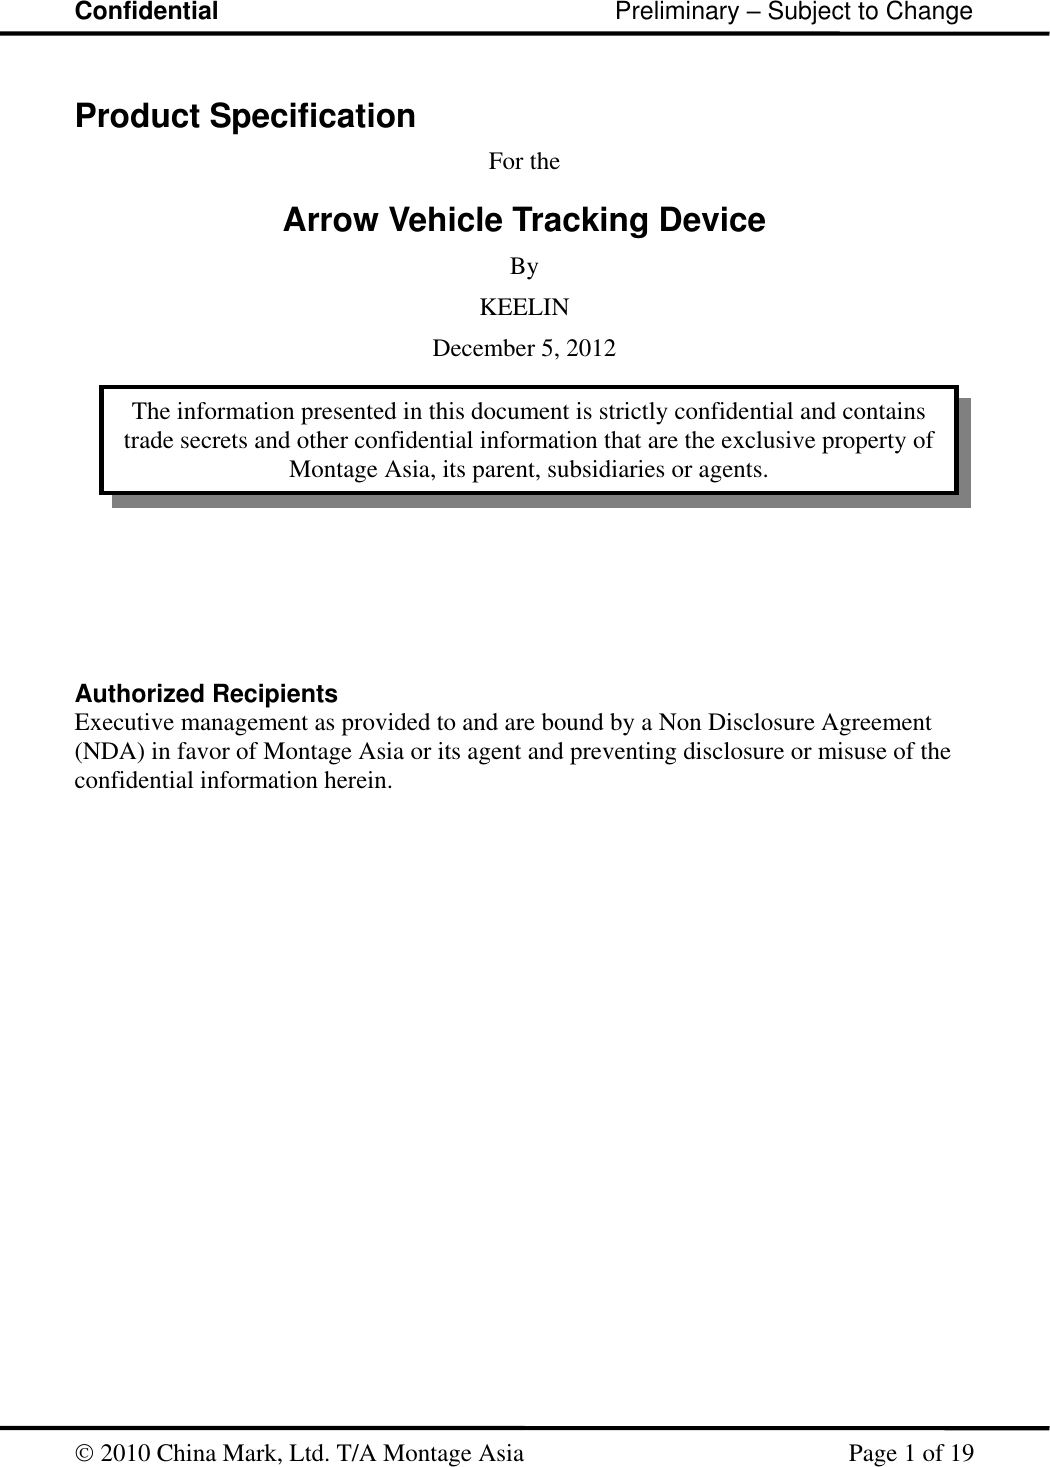 Confidential                                                         Preliminary – Subject to Change   2010 China Mark, Ltd. T/A Montage Asia   Page 1 of 19  Product Specification For the Arrow Vehicle Tracking Device By KEELIN December 5, 2012            Authorized Recipients Executive management as provided to and are bound by a Non Disclosure Agreement (NDA) in favor of Montage Asia or its agent and preventing disclosure or misuse of the confidential information herein. The information presented in this document is strictly confidential and contains trade secrets and other confidential information that are the exclusive property of Montage Asia, its parent, subsidiaries or agents. 